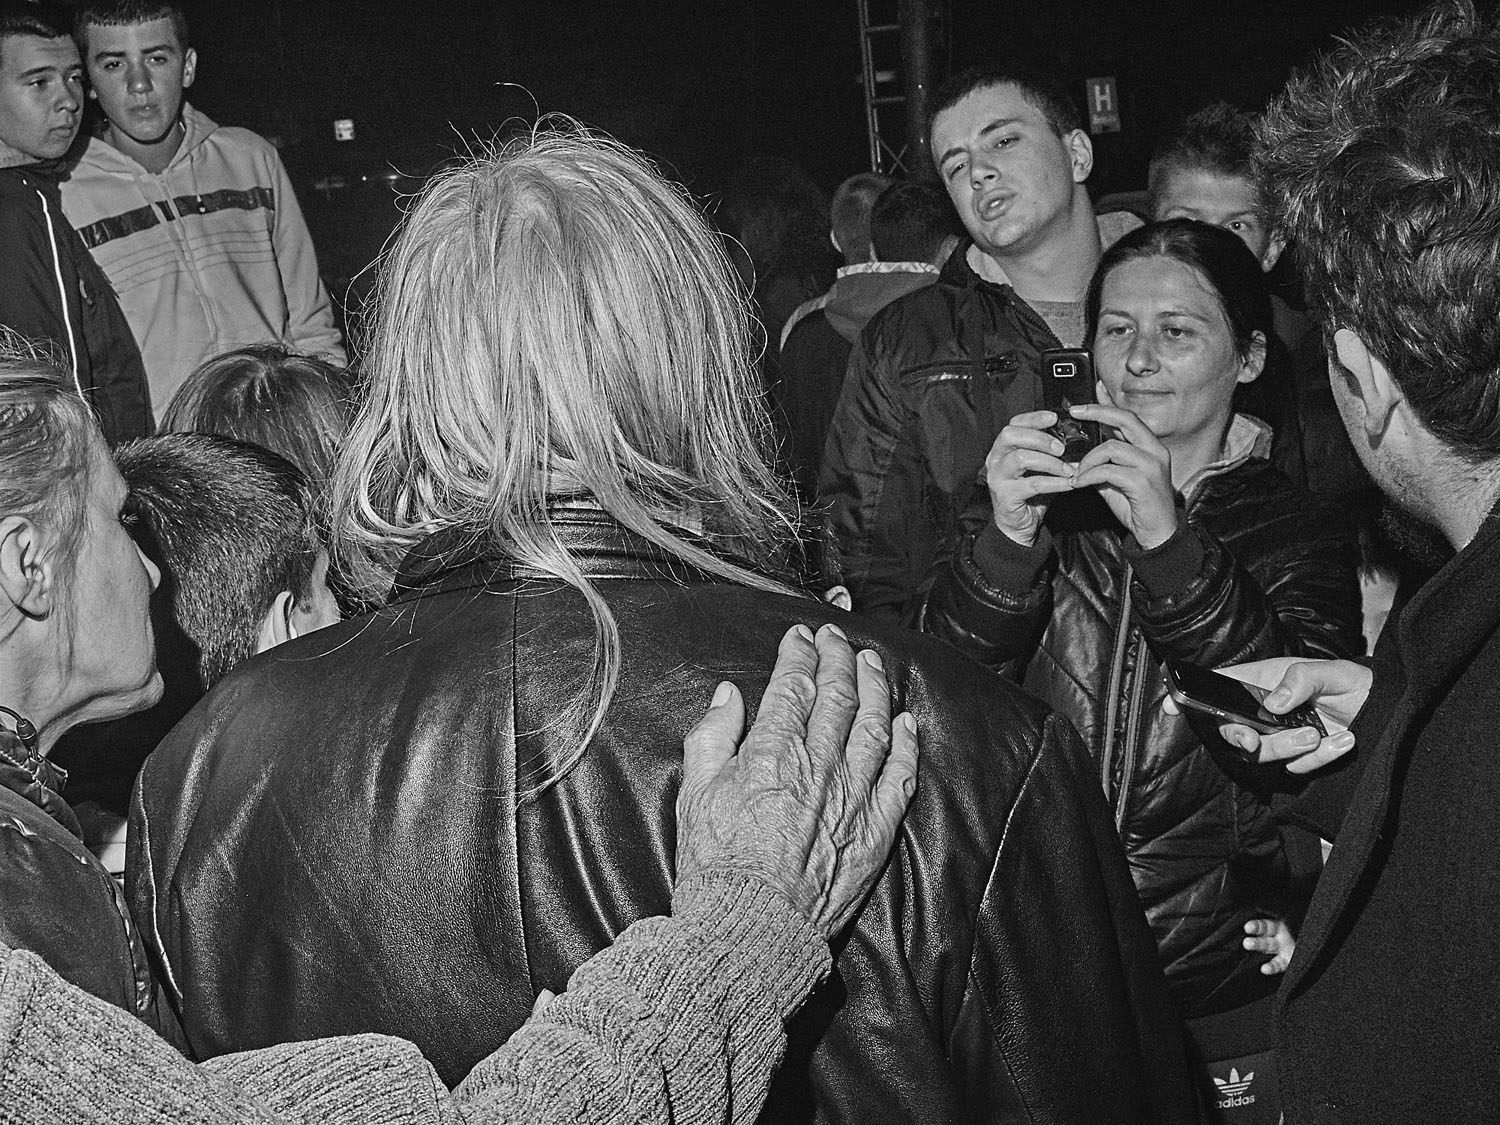 People welcome Bora Djordjevic, the frontman of nationalist band Riblja Cobra, in Mitrovica the night before elections in Kosovo